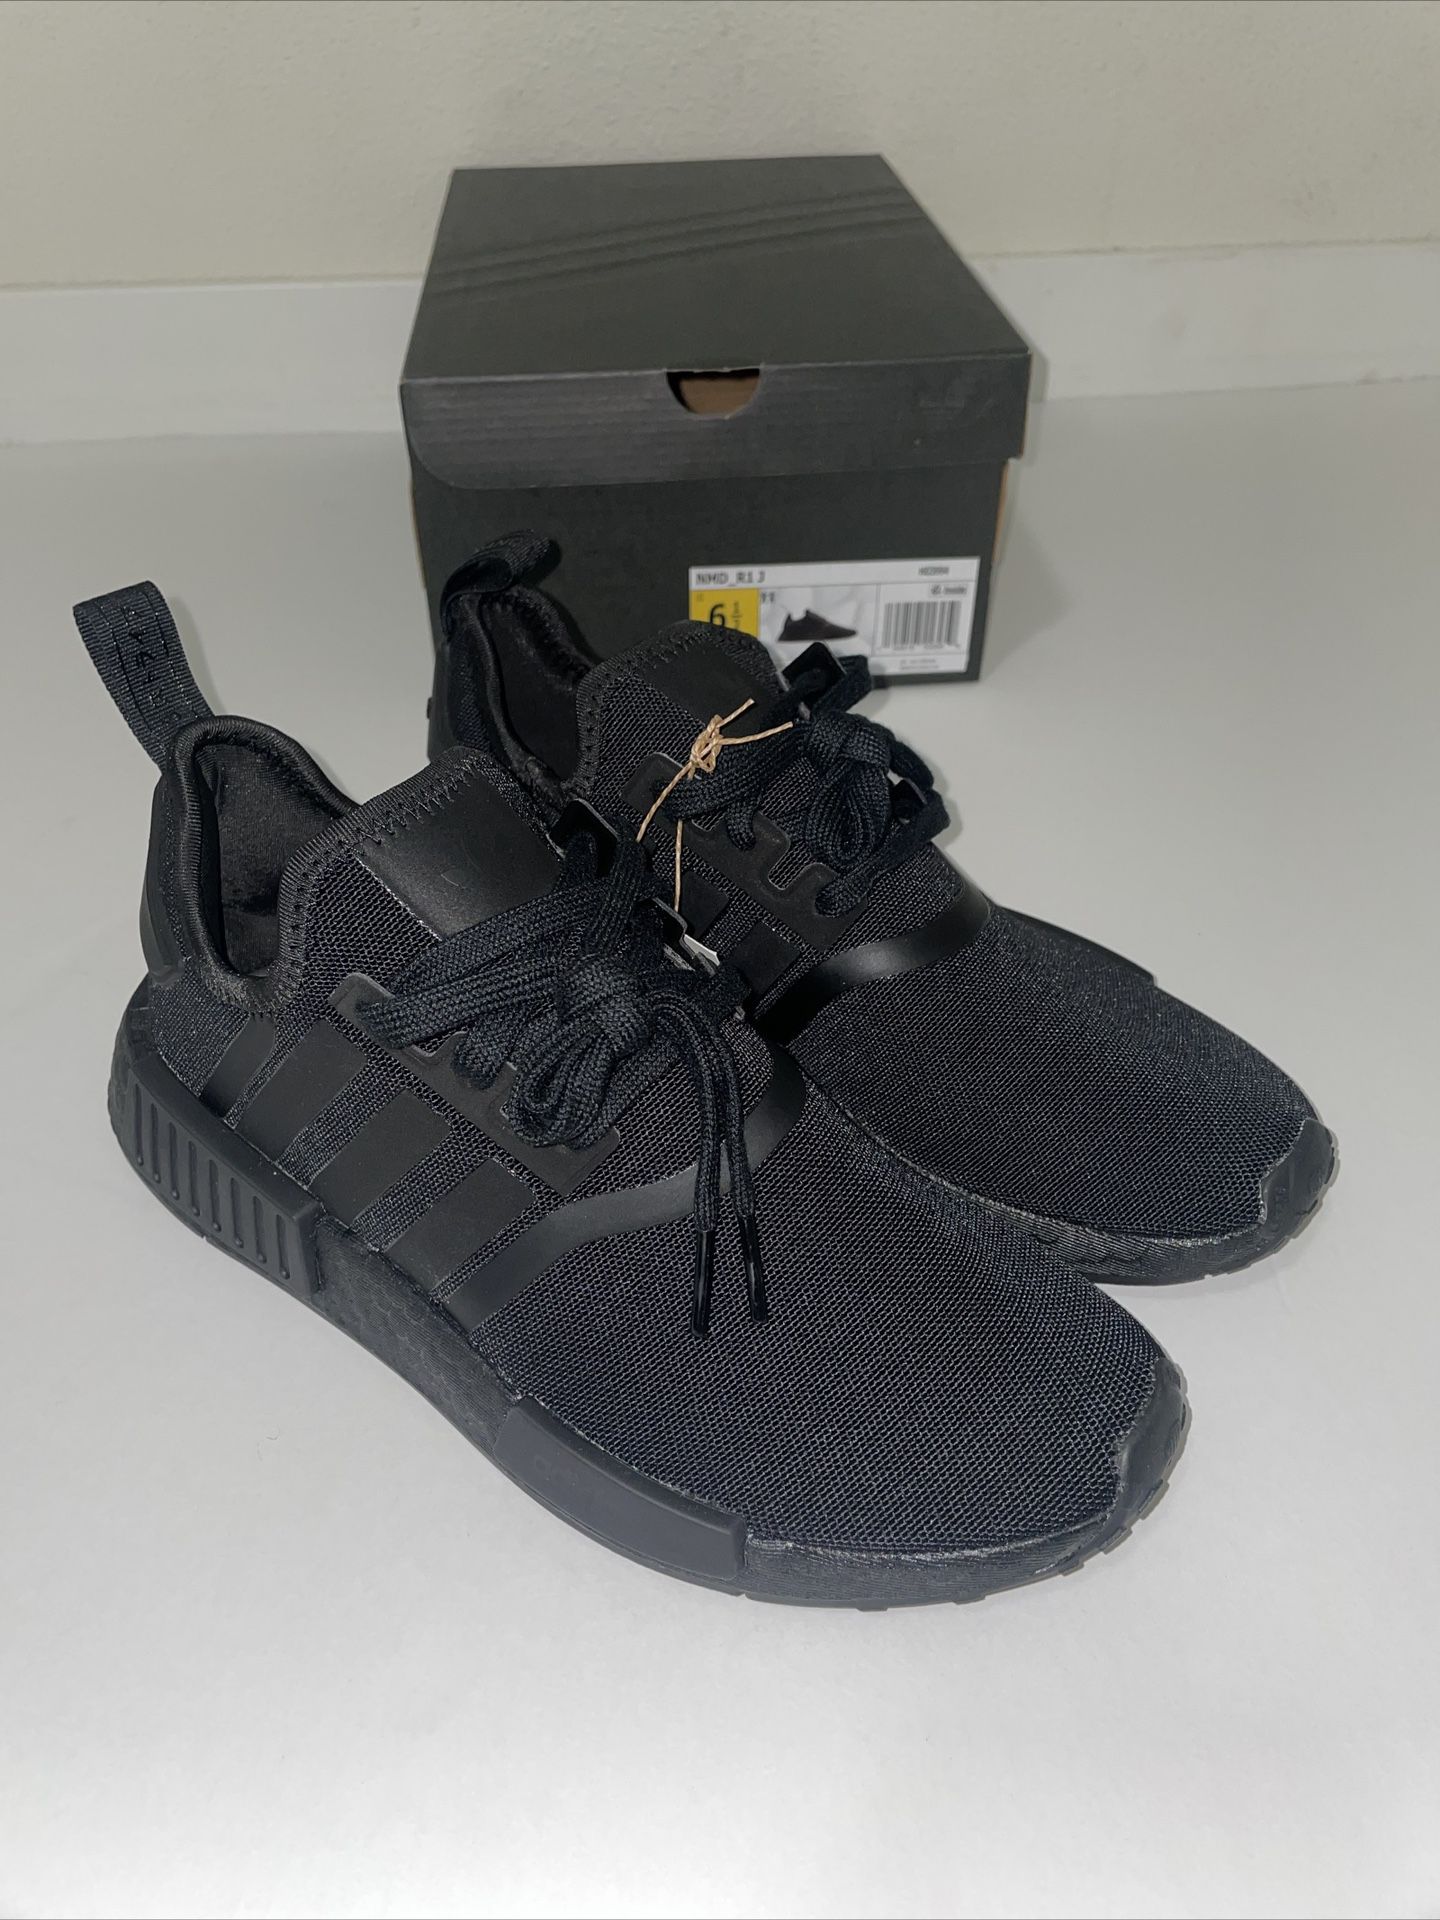 affald sollys Mærkelig Adidas NMD R1 Triple Black for Sale in Mcminnville, OR - OfferUp